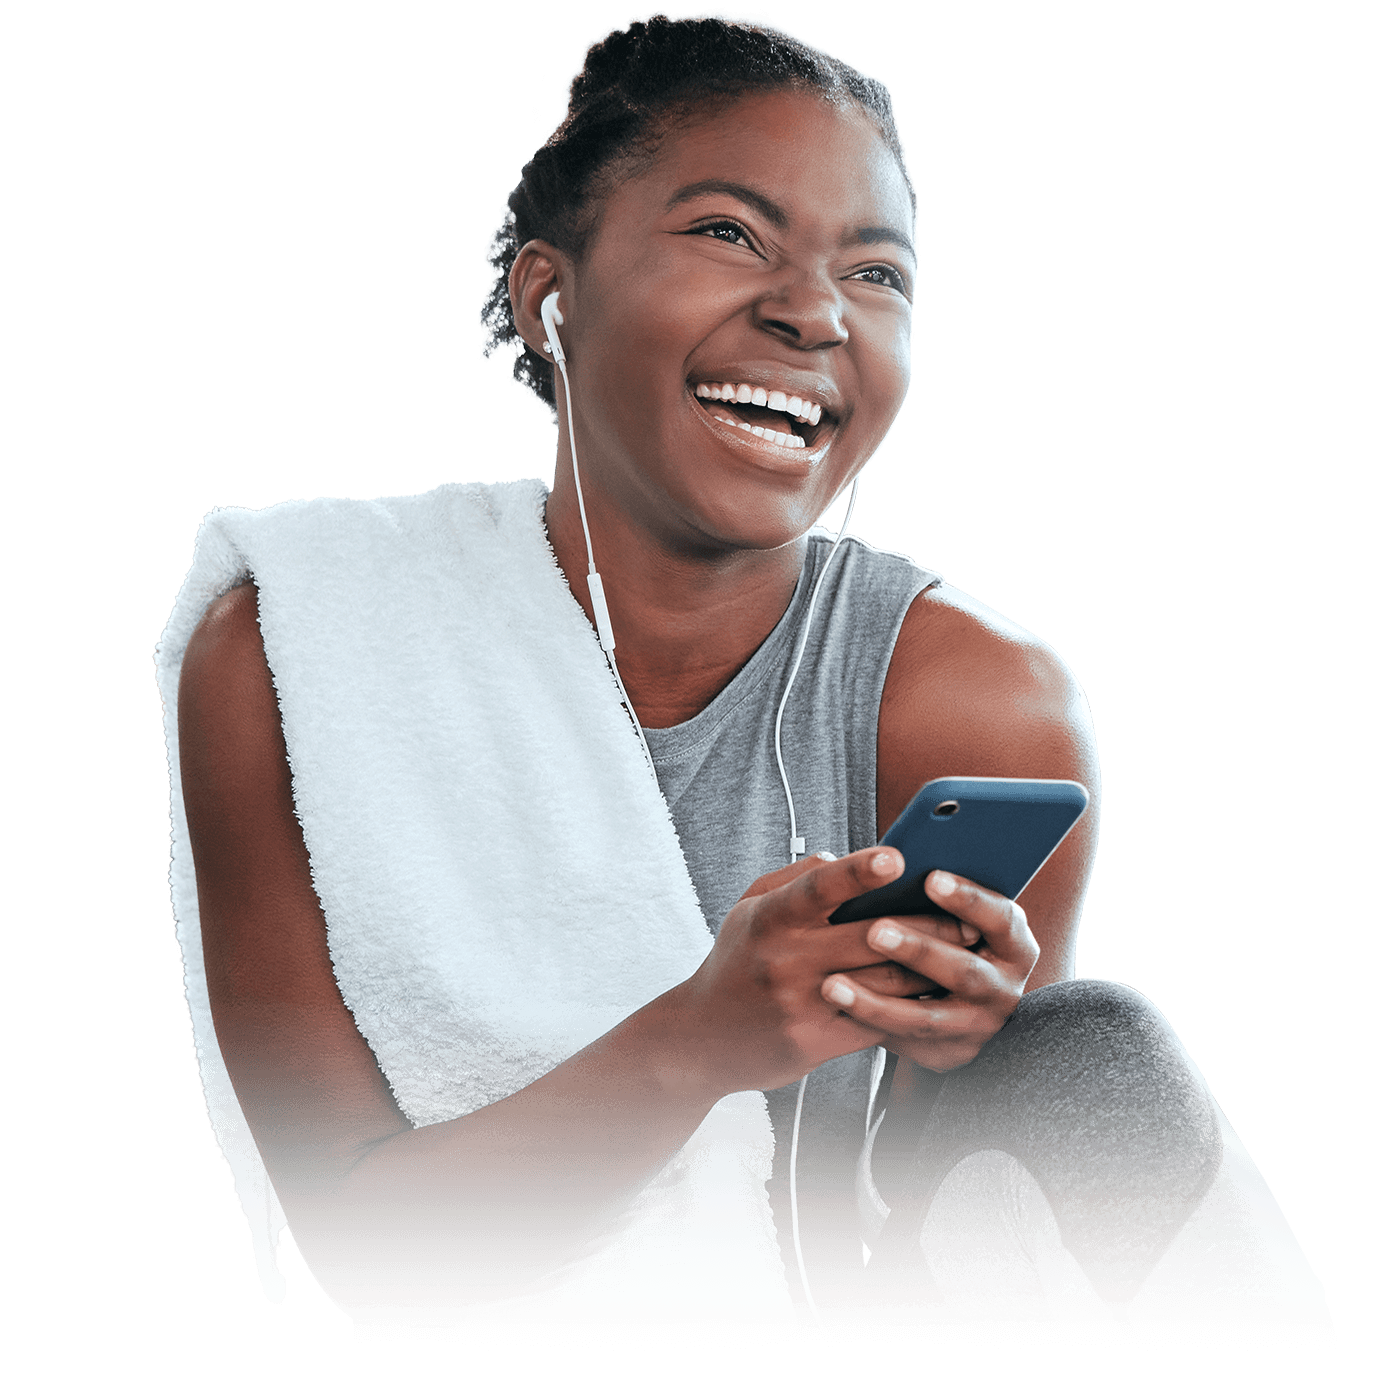 A woman in a gray top with a white towel on her shoulder, laughing with earphones connected to a phone in her hand.